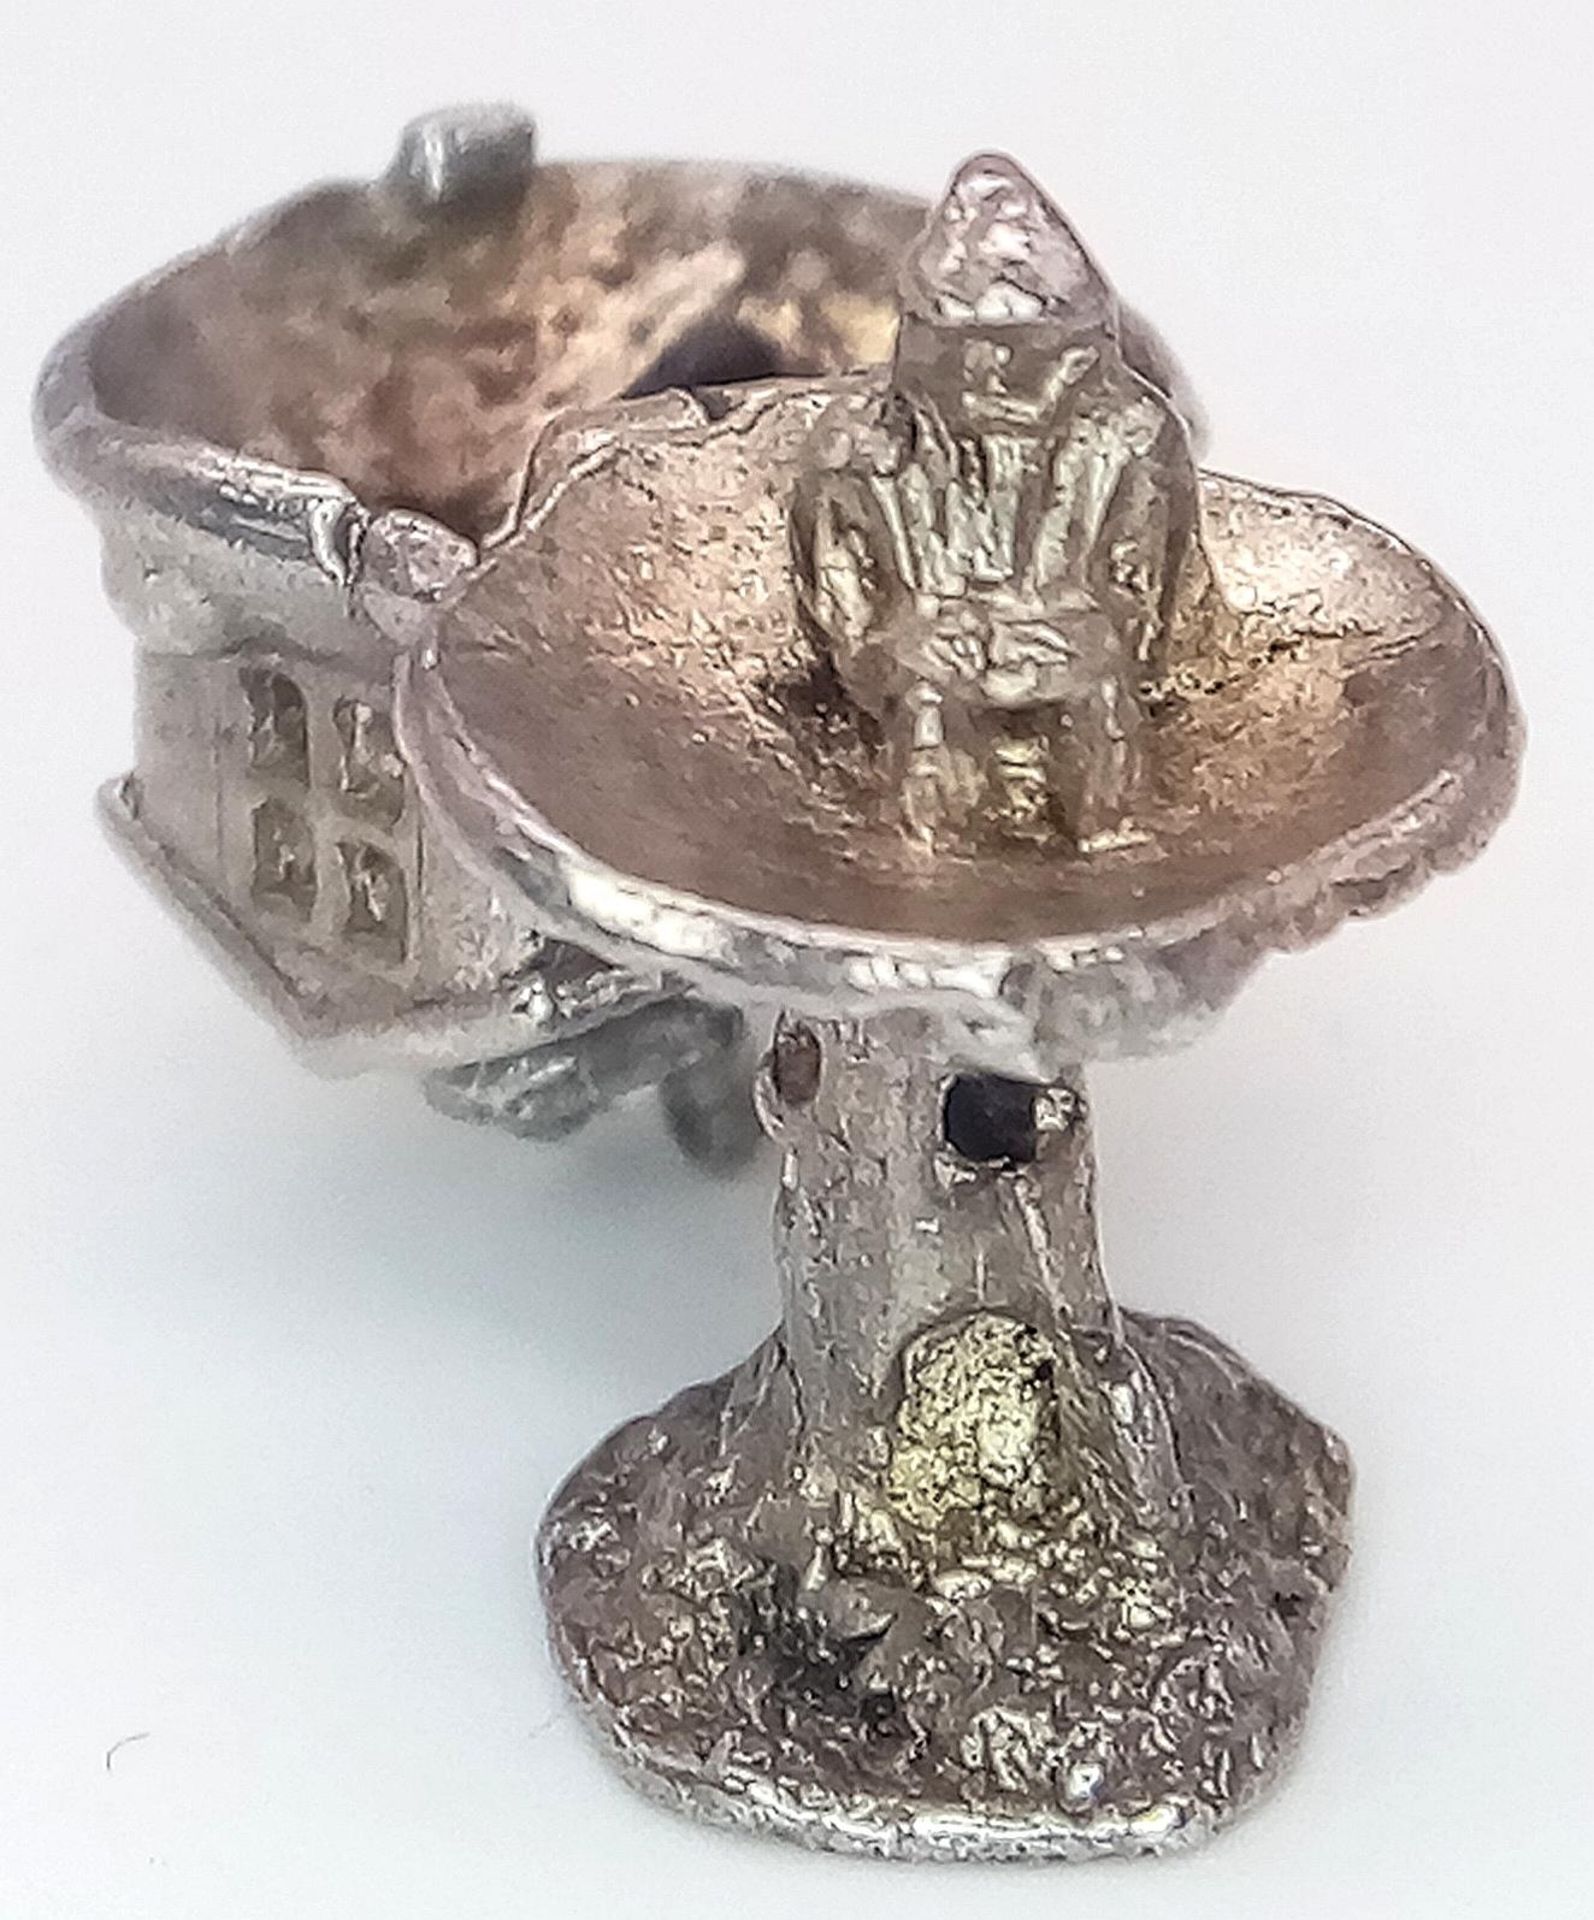 A VINTAGE STERLING SILVER TREE HOUSE CHARM, WHICH OPENS TO REVEAL A WIZARD INSIDE, WEIGHT 4G - Image 2 of 8